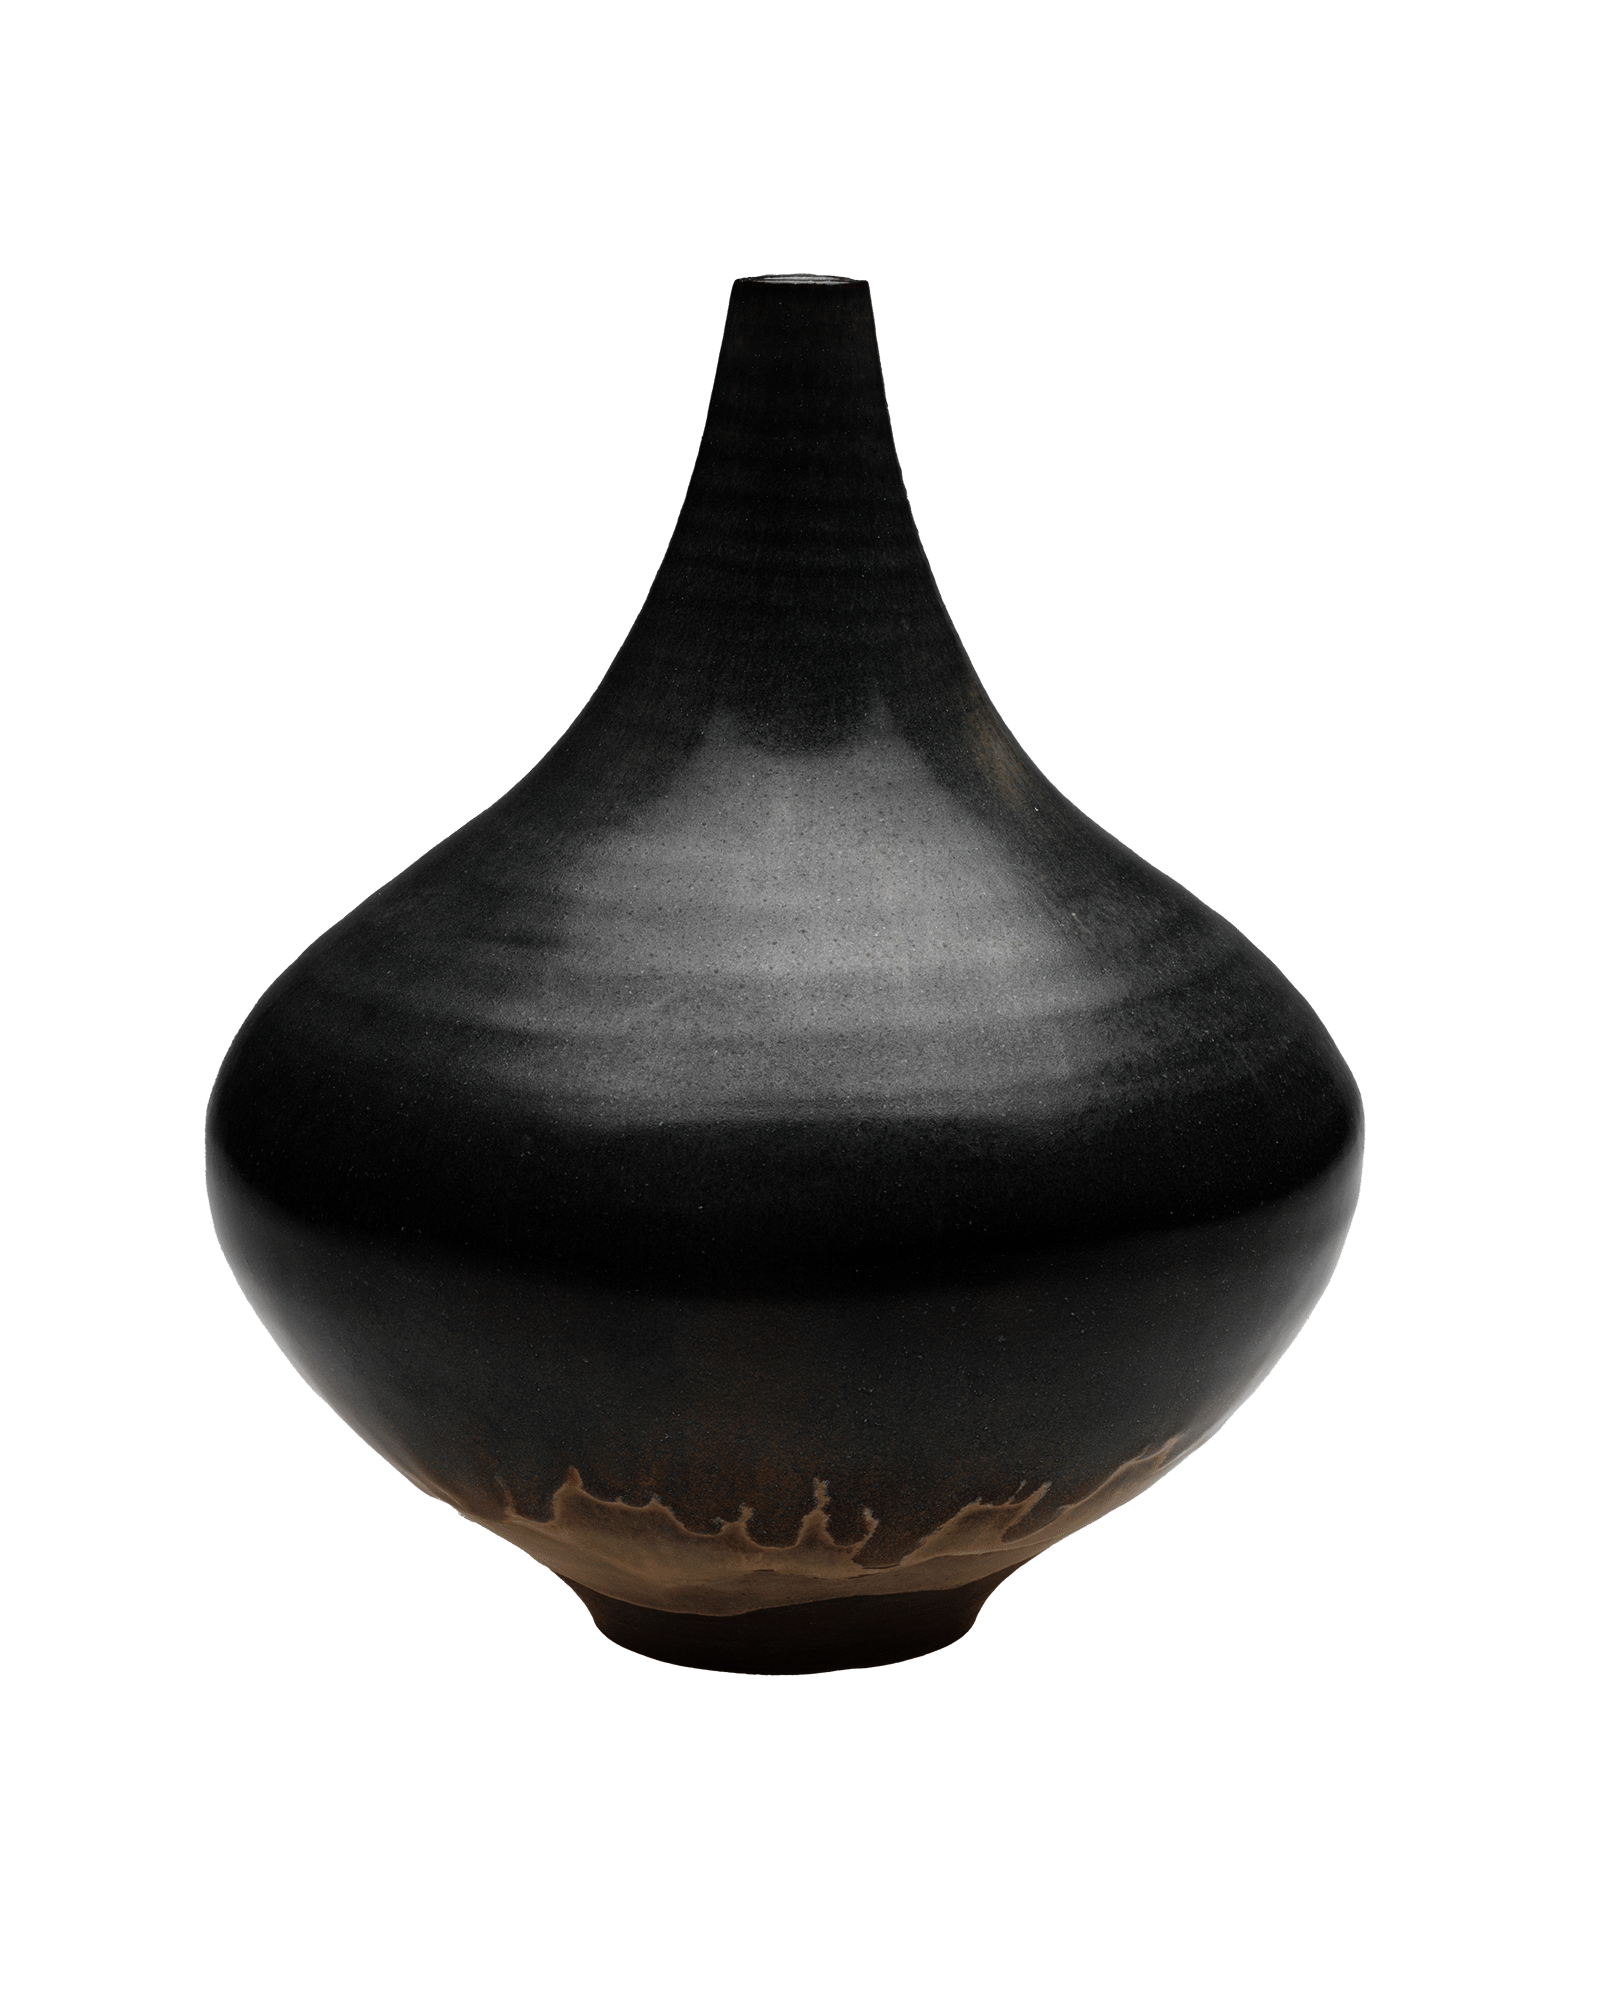 Black stoneware vessel with a tall narrow opening at the top tapering to a wider round base 